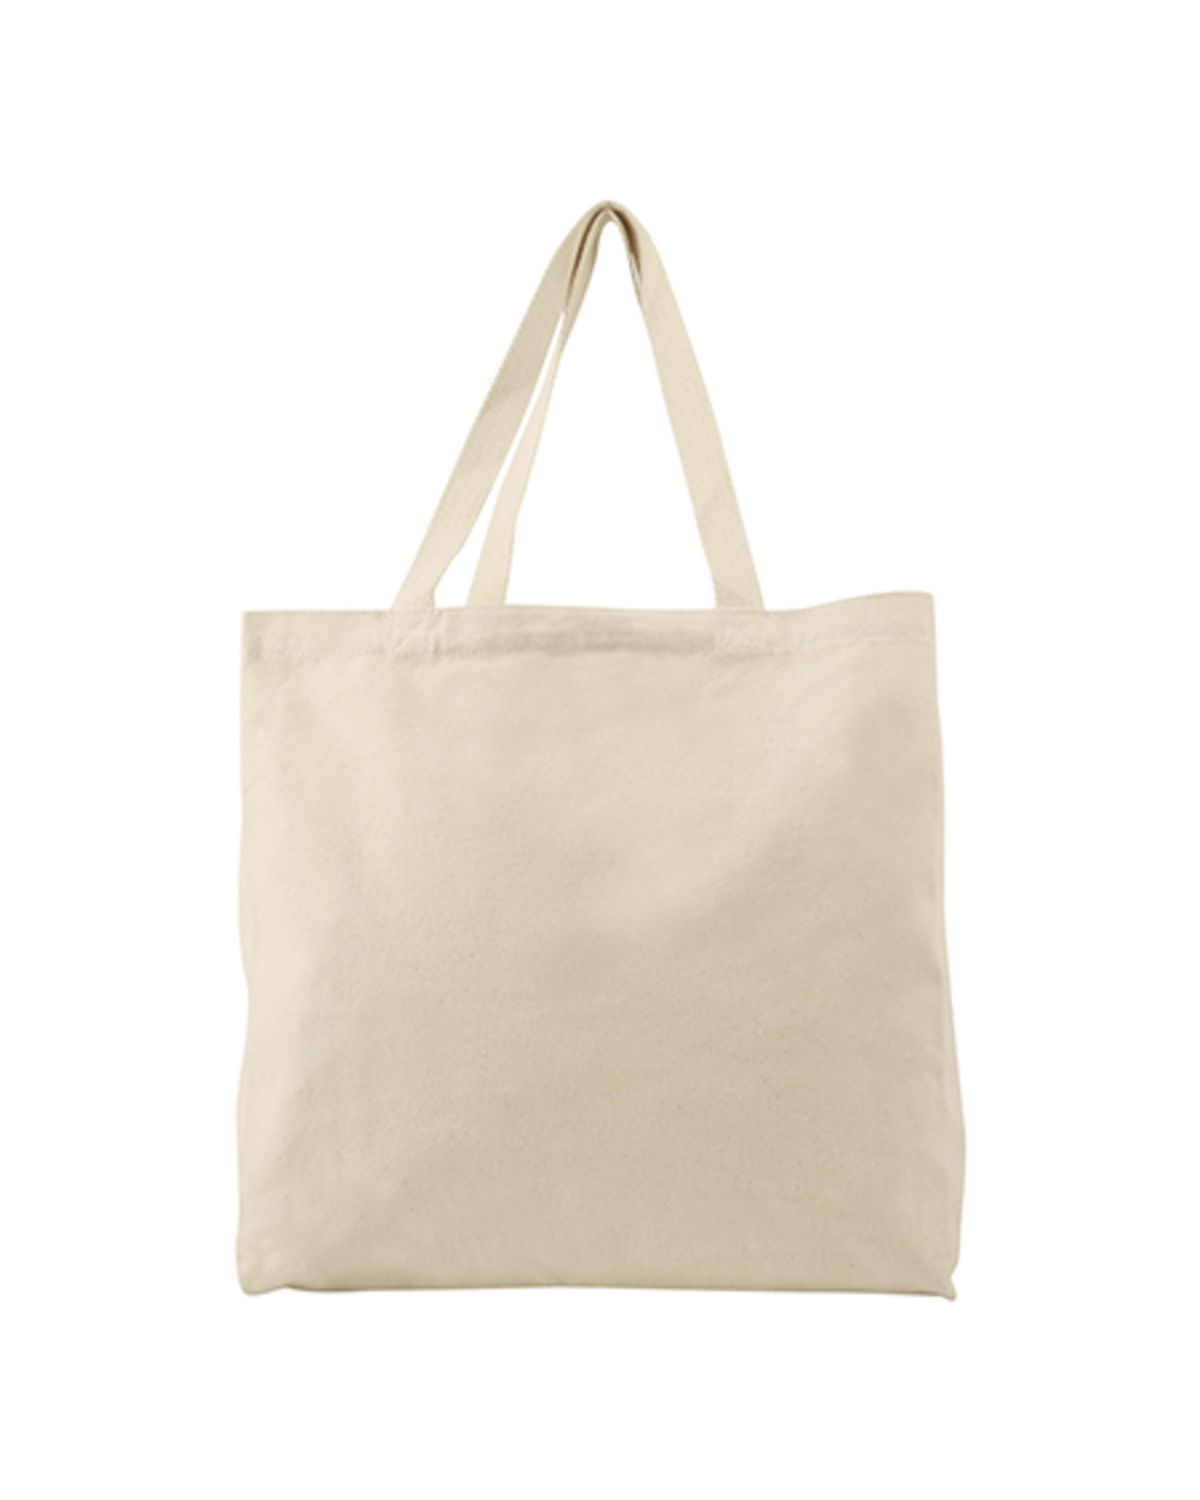 'Liberty Bags 8503 Gusseted Cotton Canvas Tote'